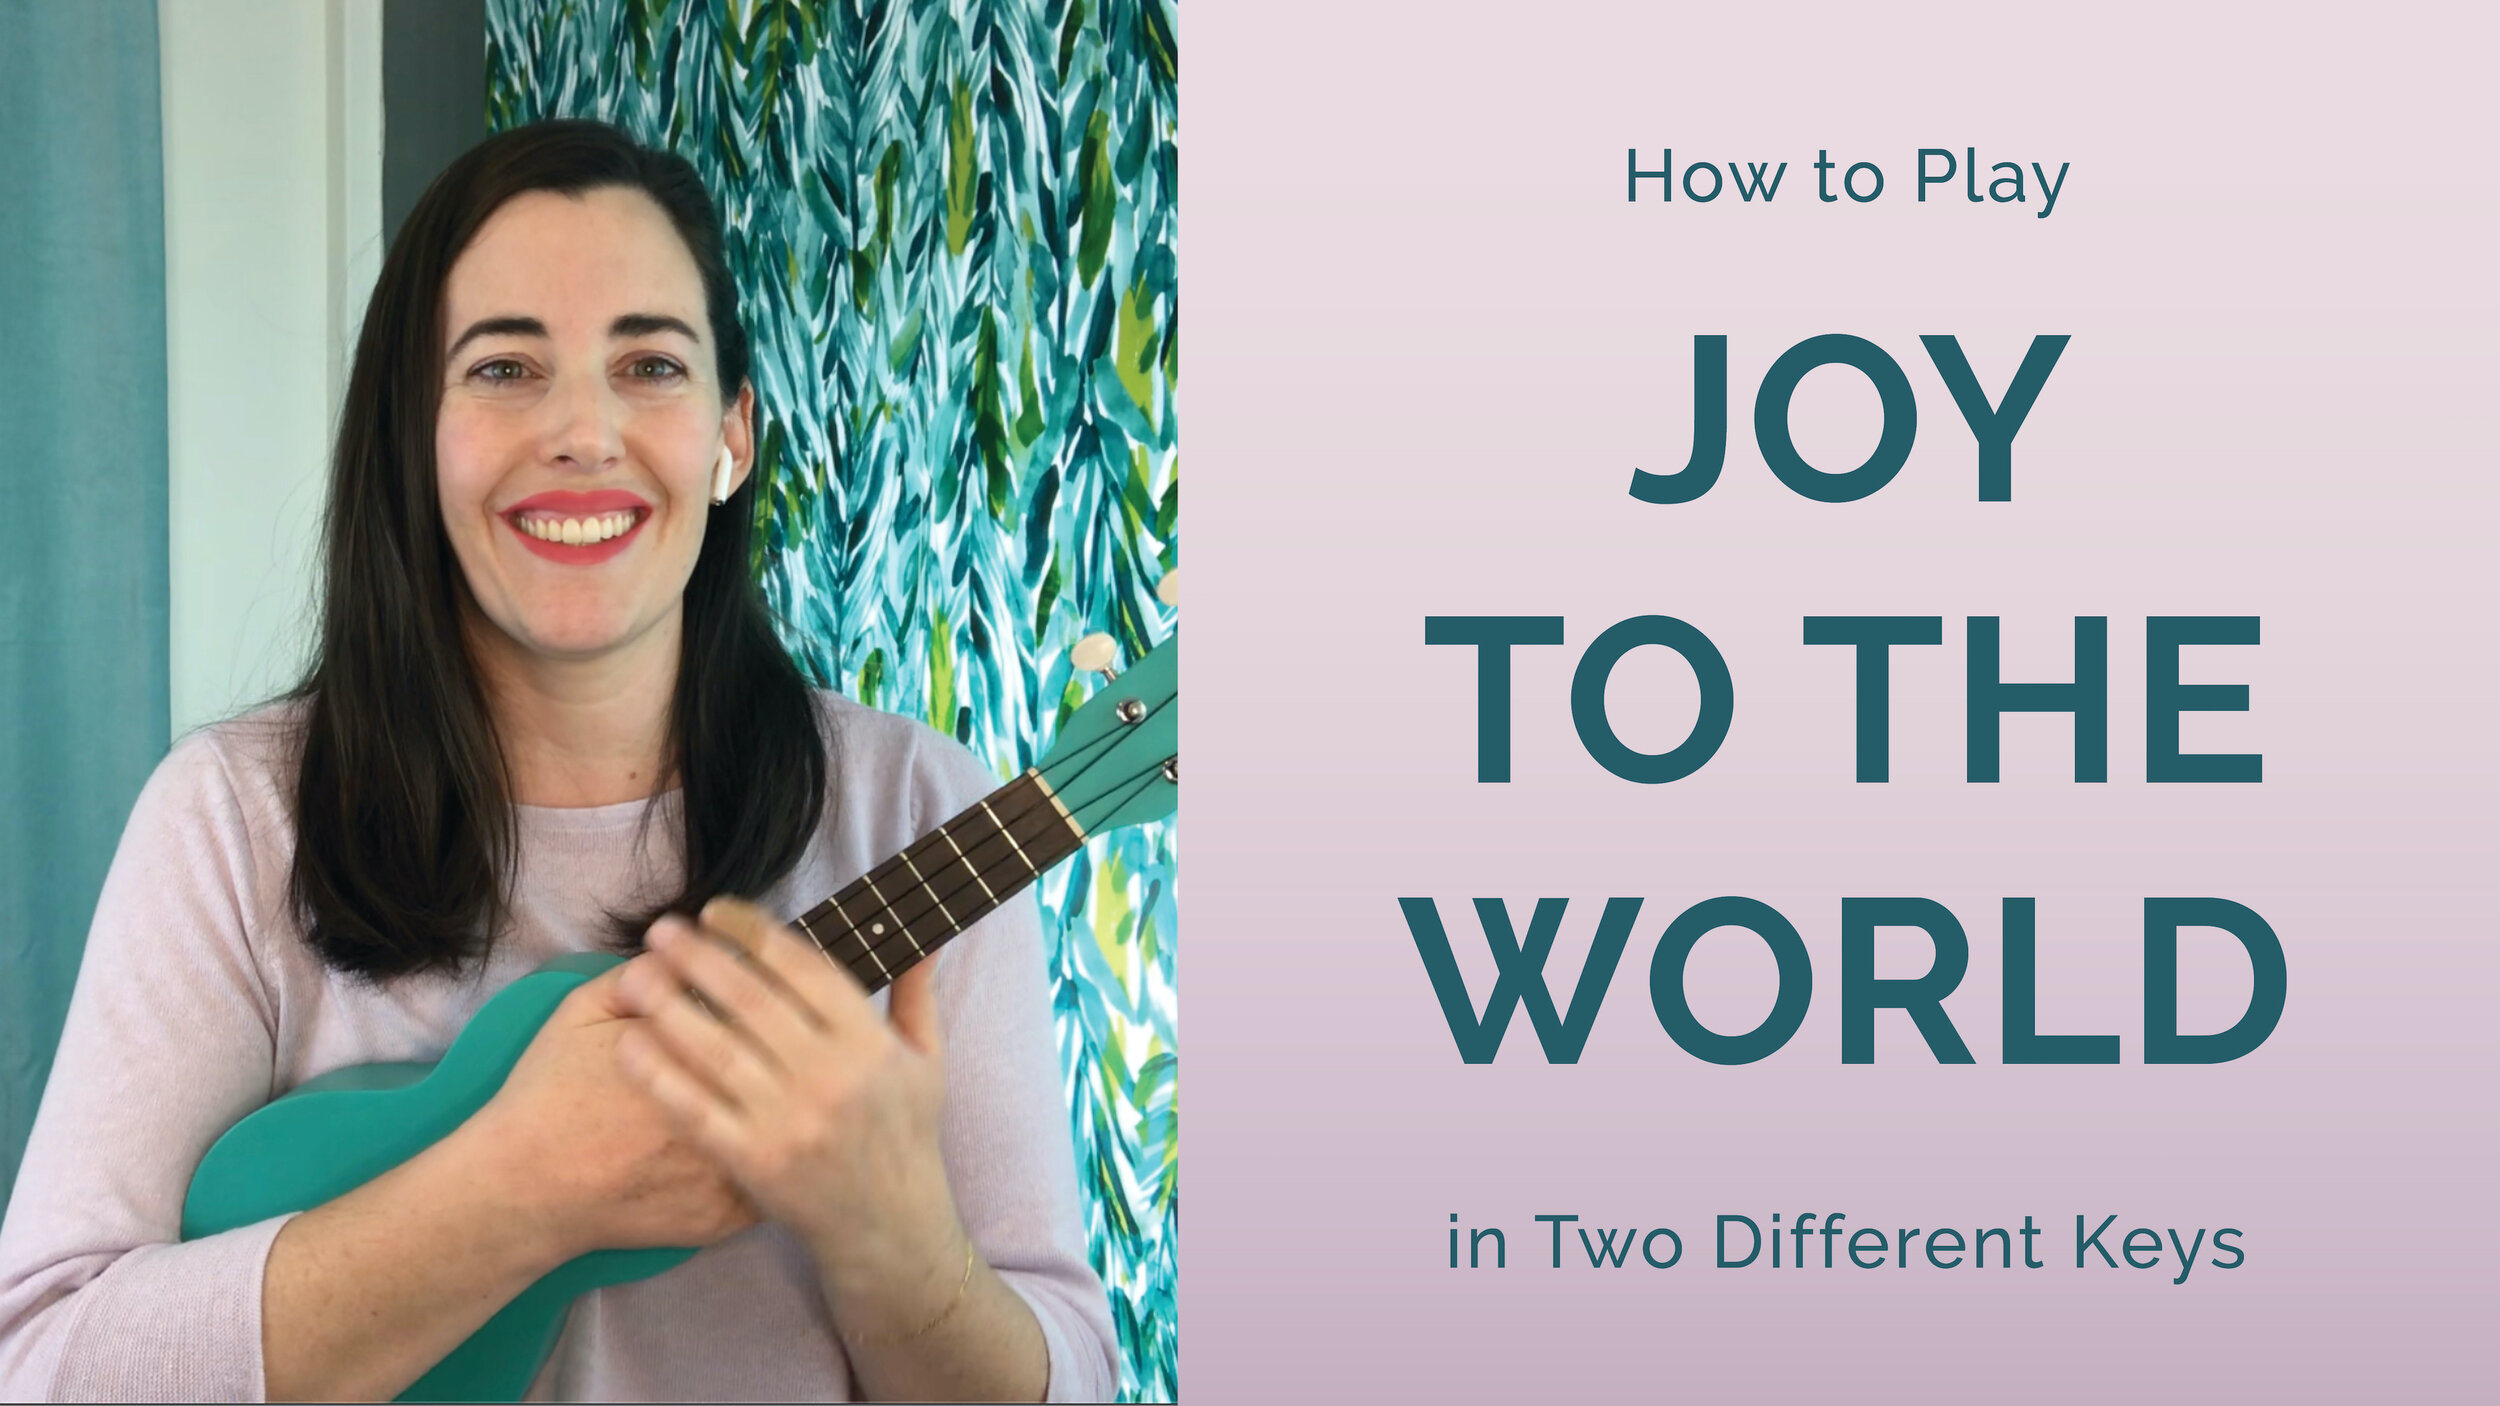 Joy to the World in Two Different Keys